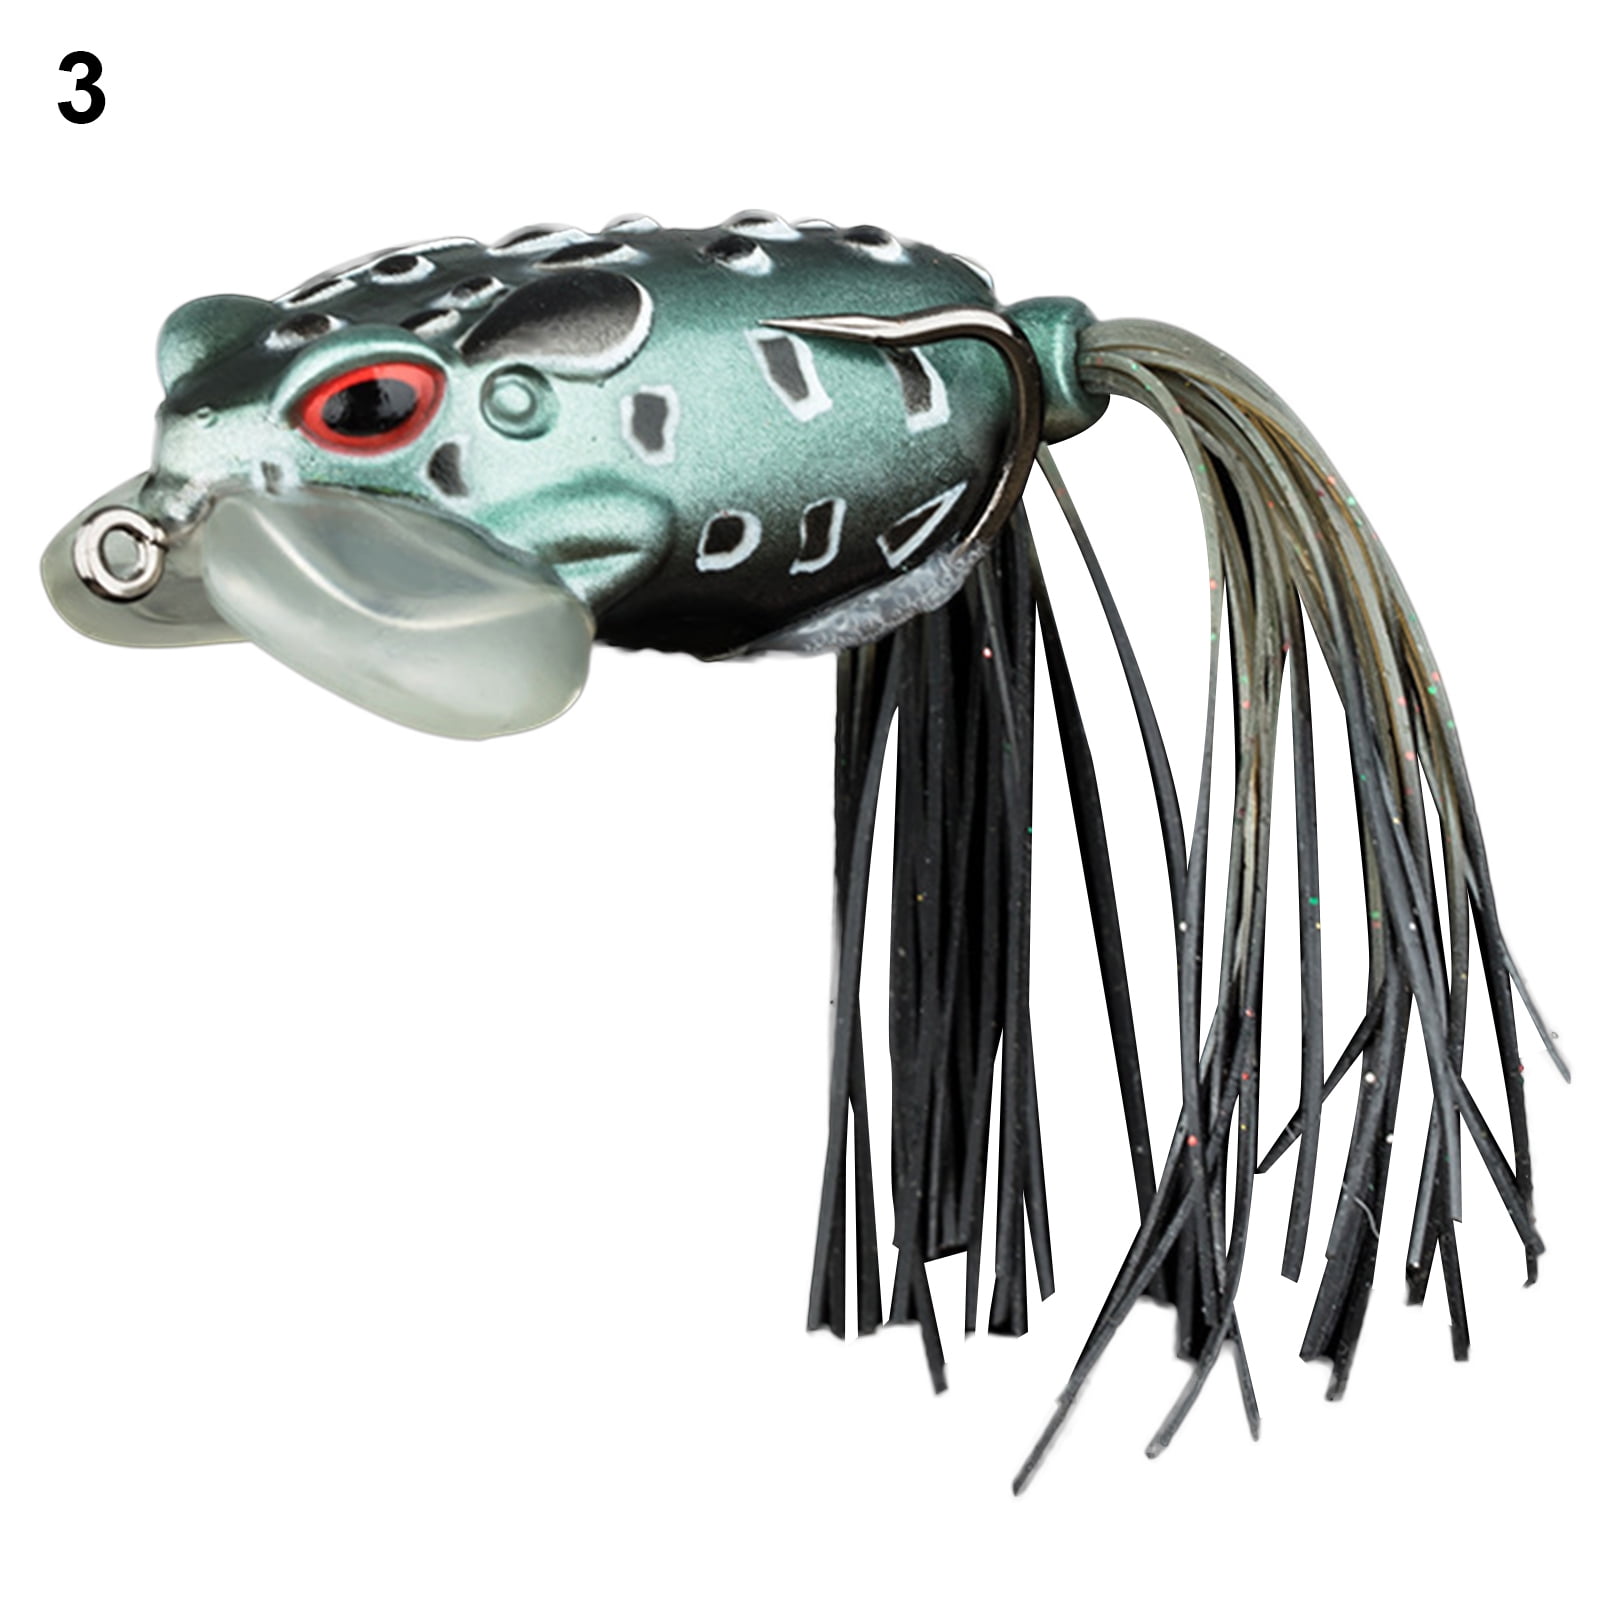  Frog Lure, Mouse Lure, Spider Lure, Trout Fishing Lure Kit,  Topwater Freshwater Saltwater, Realistic Frog, Soft Bait for Bass… (10-Pack  Various Lure) : Sports & Outdoors